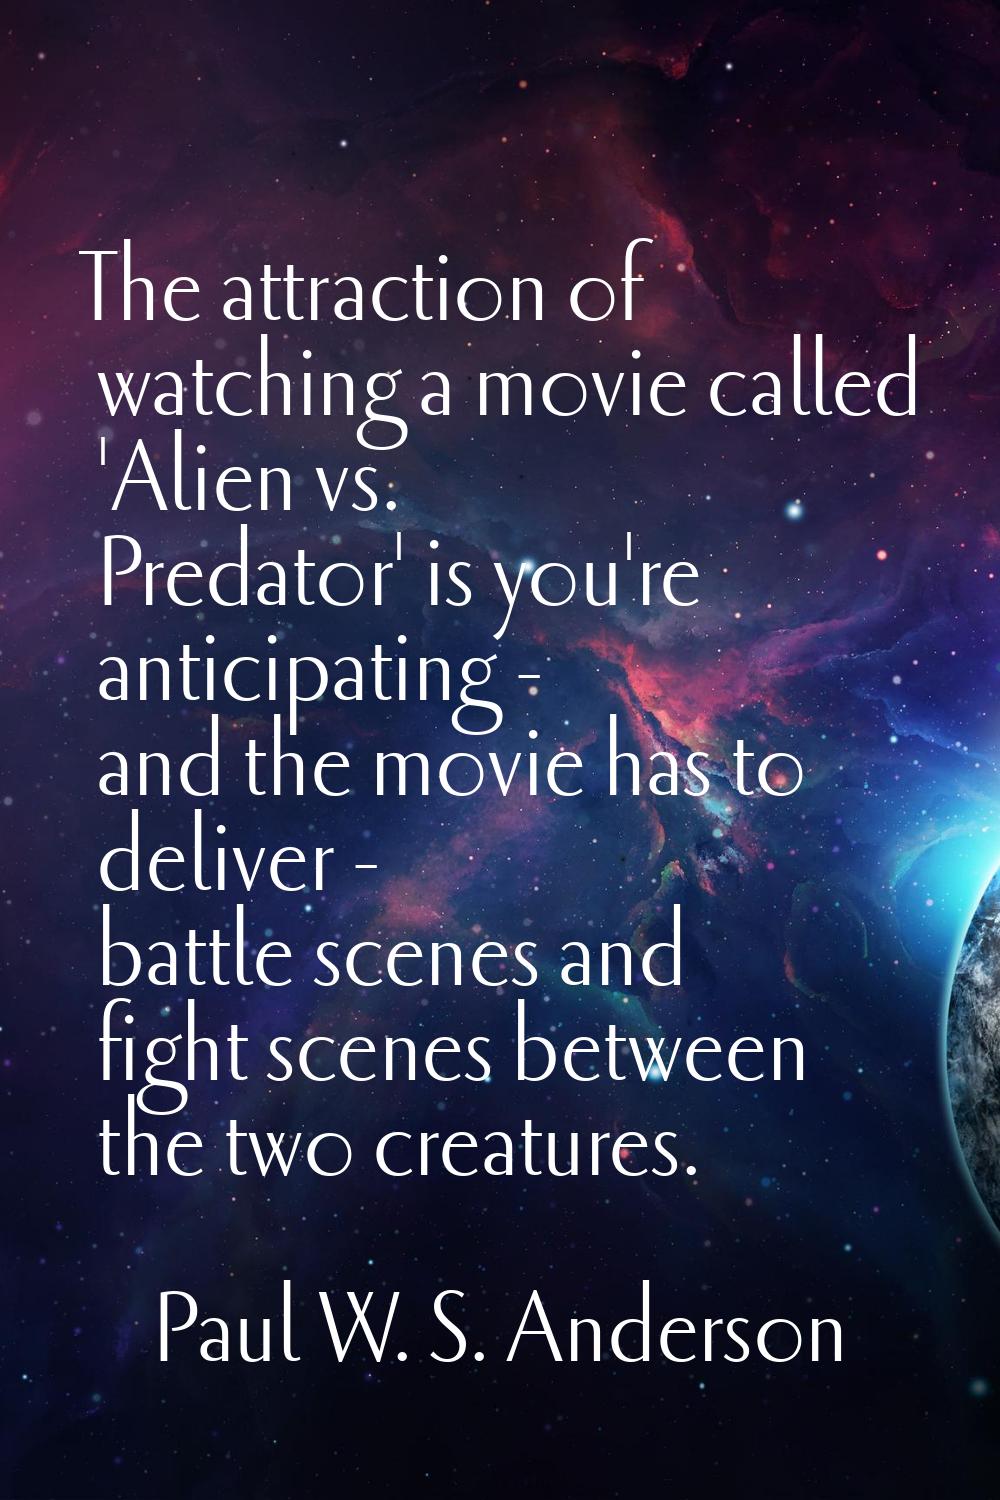 The attraction of watching a movie called 'Alien vs. Predator' is you're anticipating - and the mov